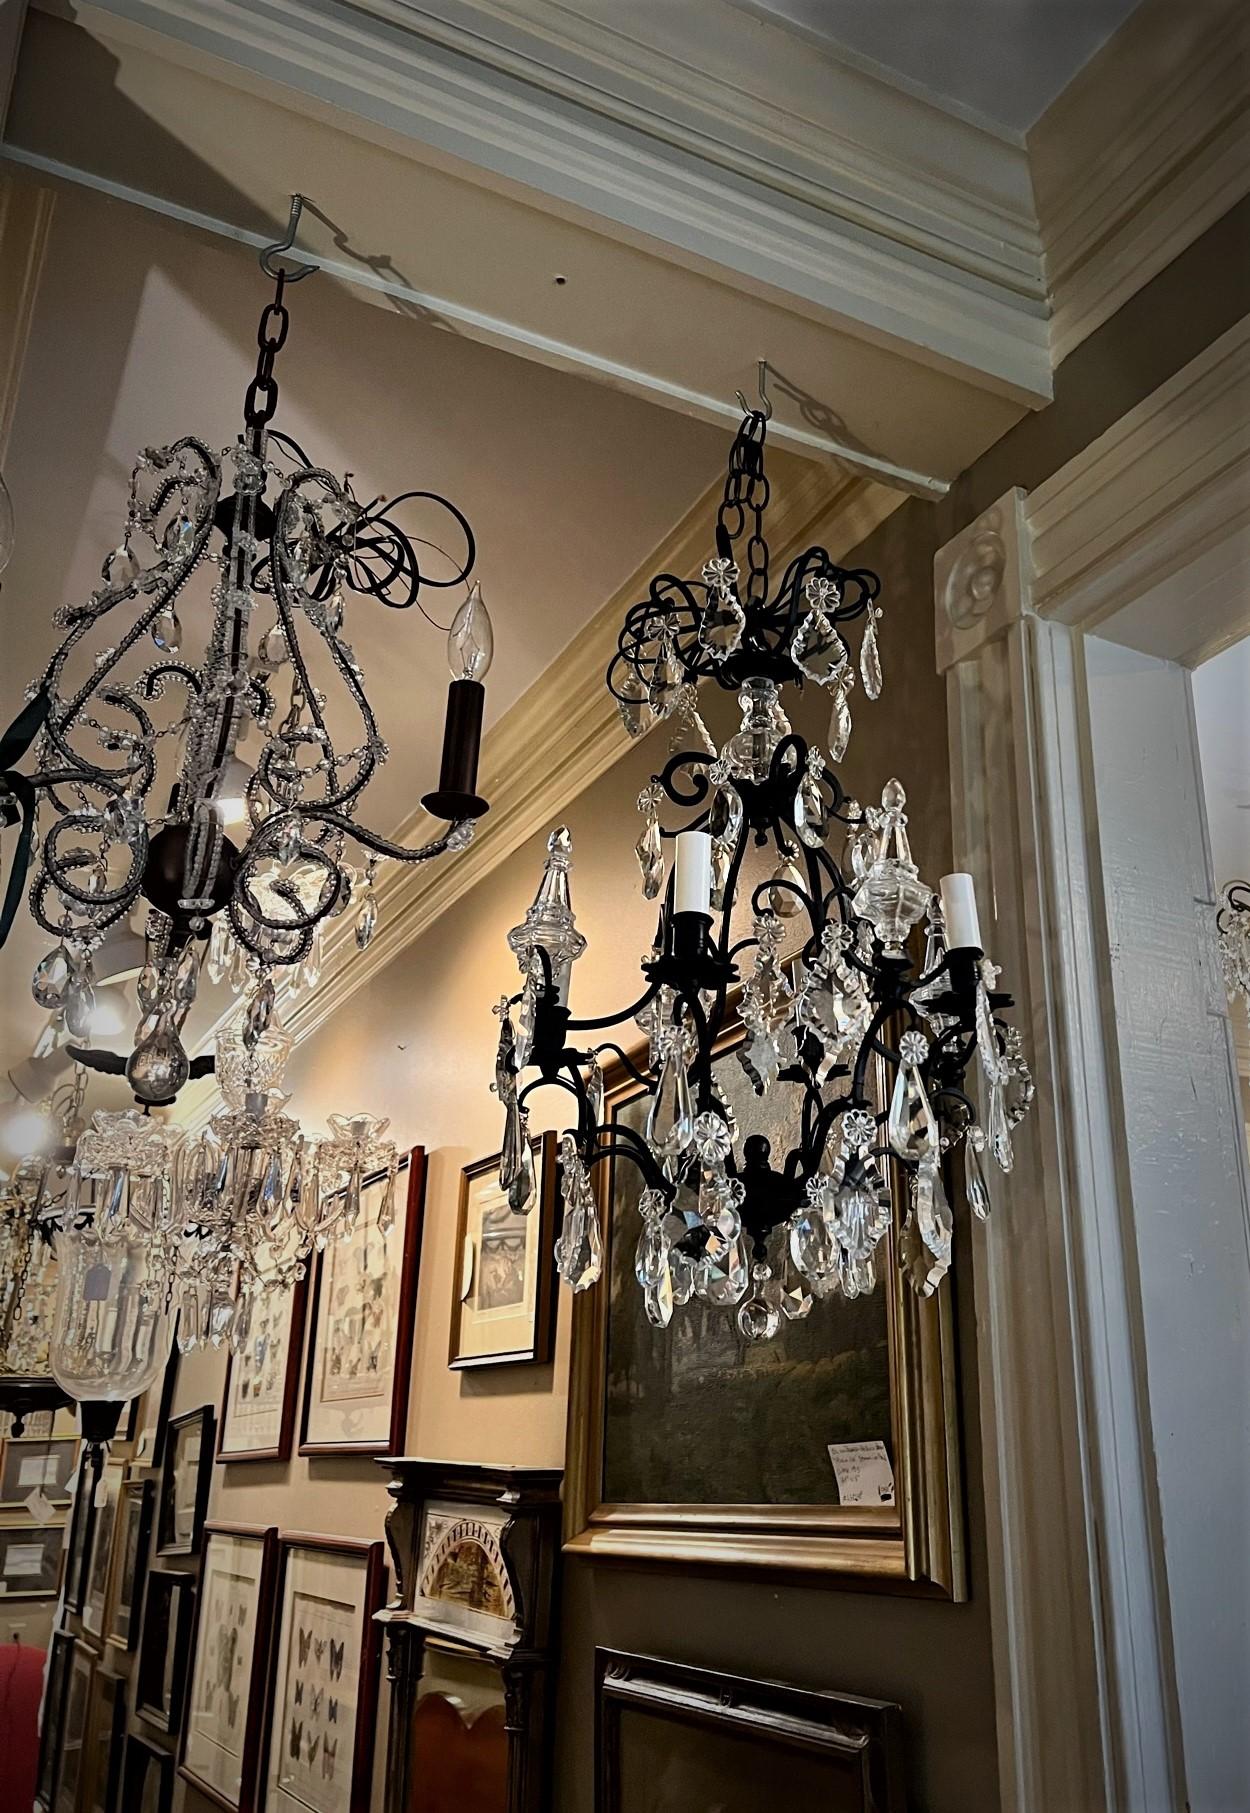 This beautiful Louis 15th style fixture has a hand-wrought cast iron frame and hand-cut Baccarat style prisms and spikes. It is perfect for the foyer, breakfast room, stairwell or any place a charming chandelier is needed. Ceiling cap, hanging